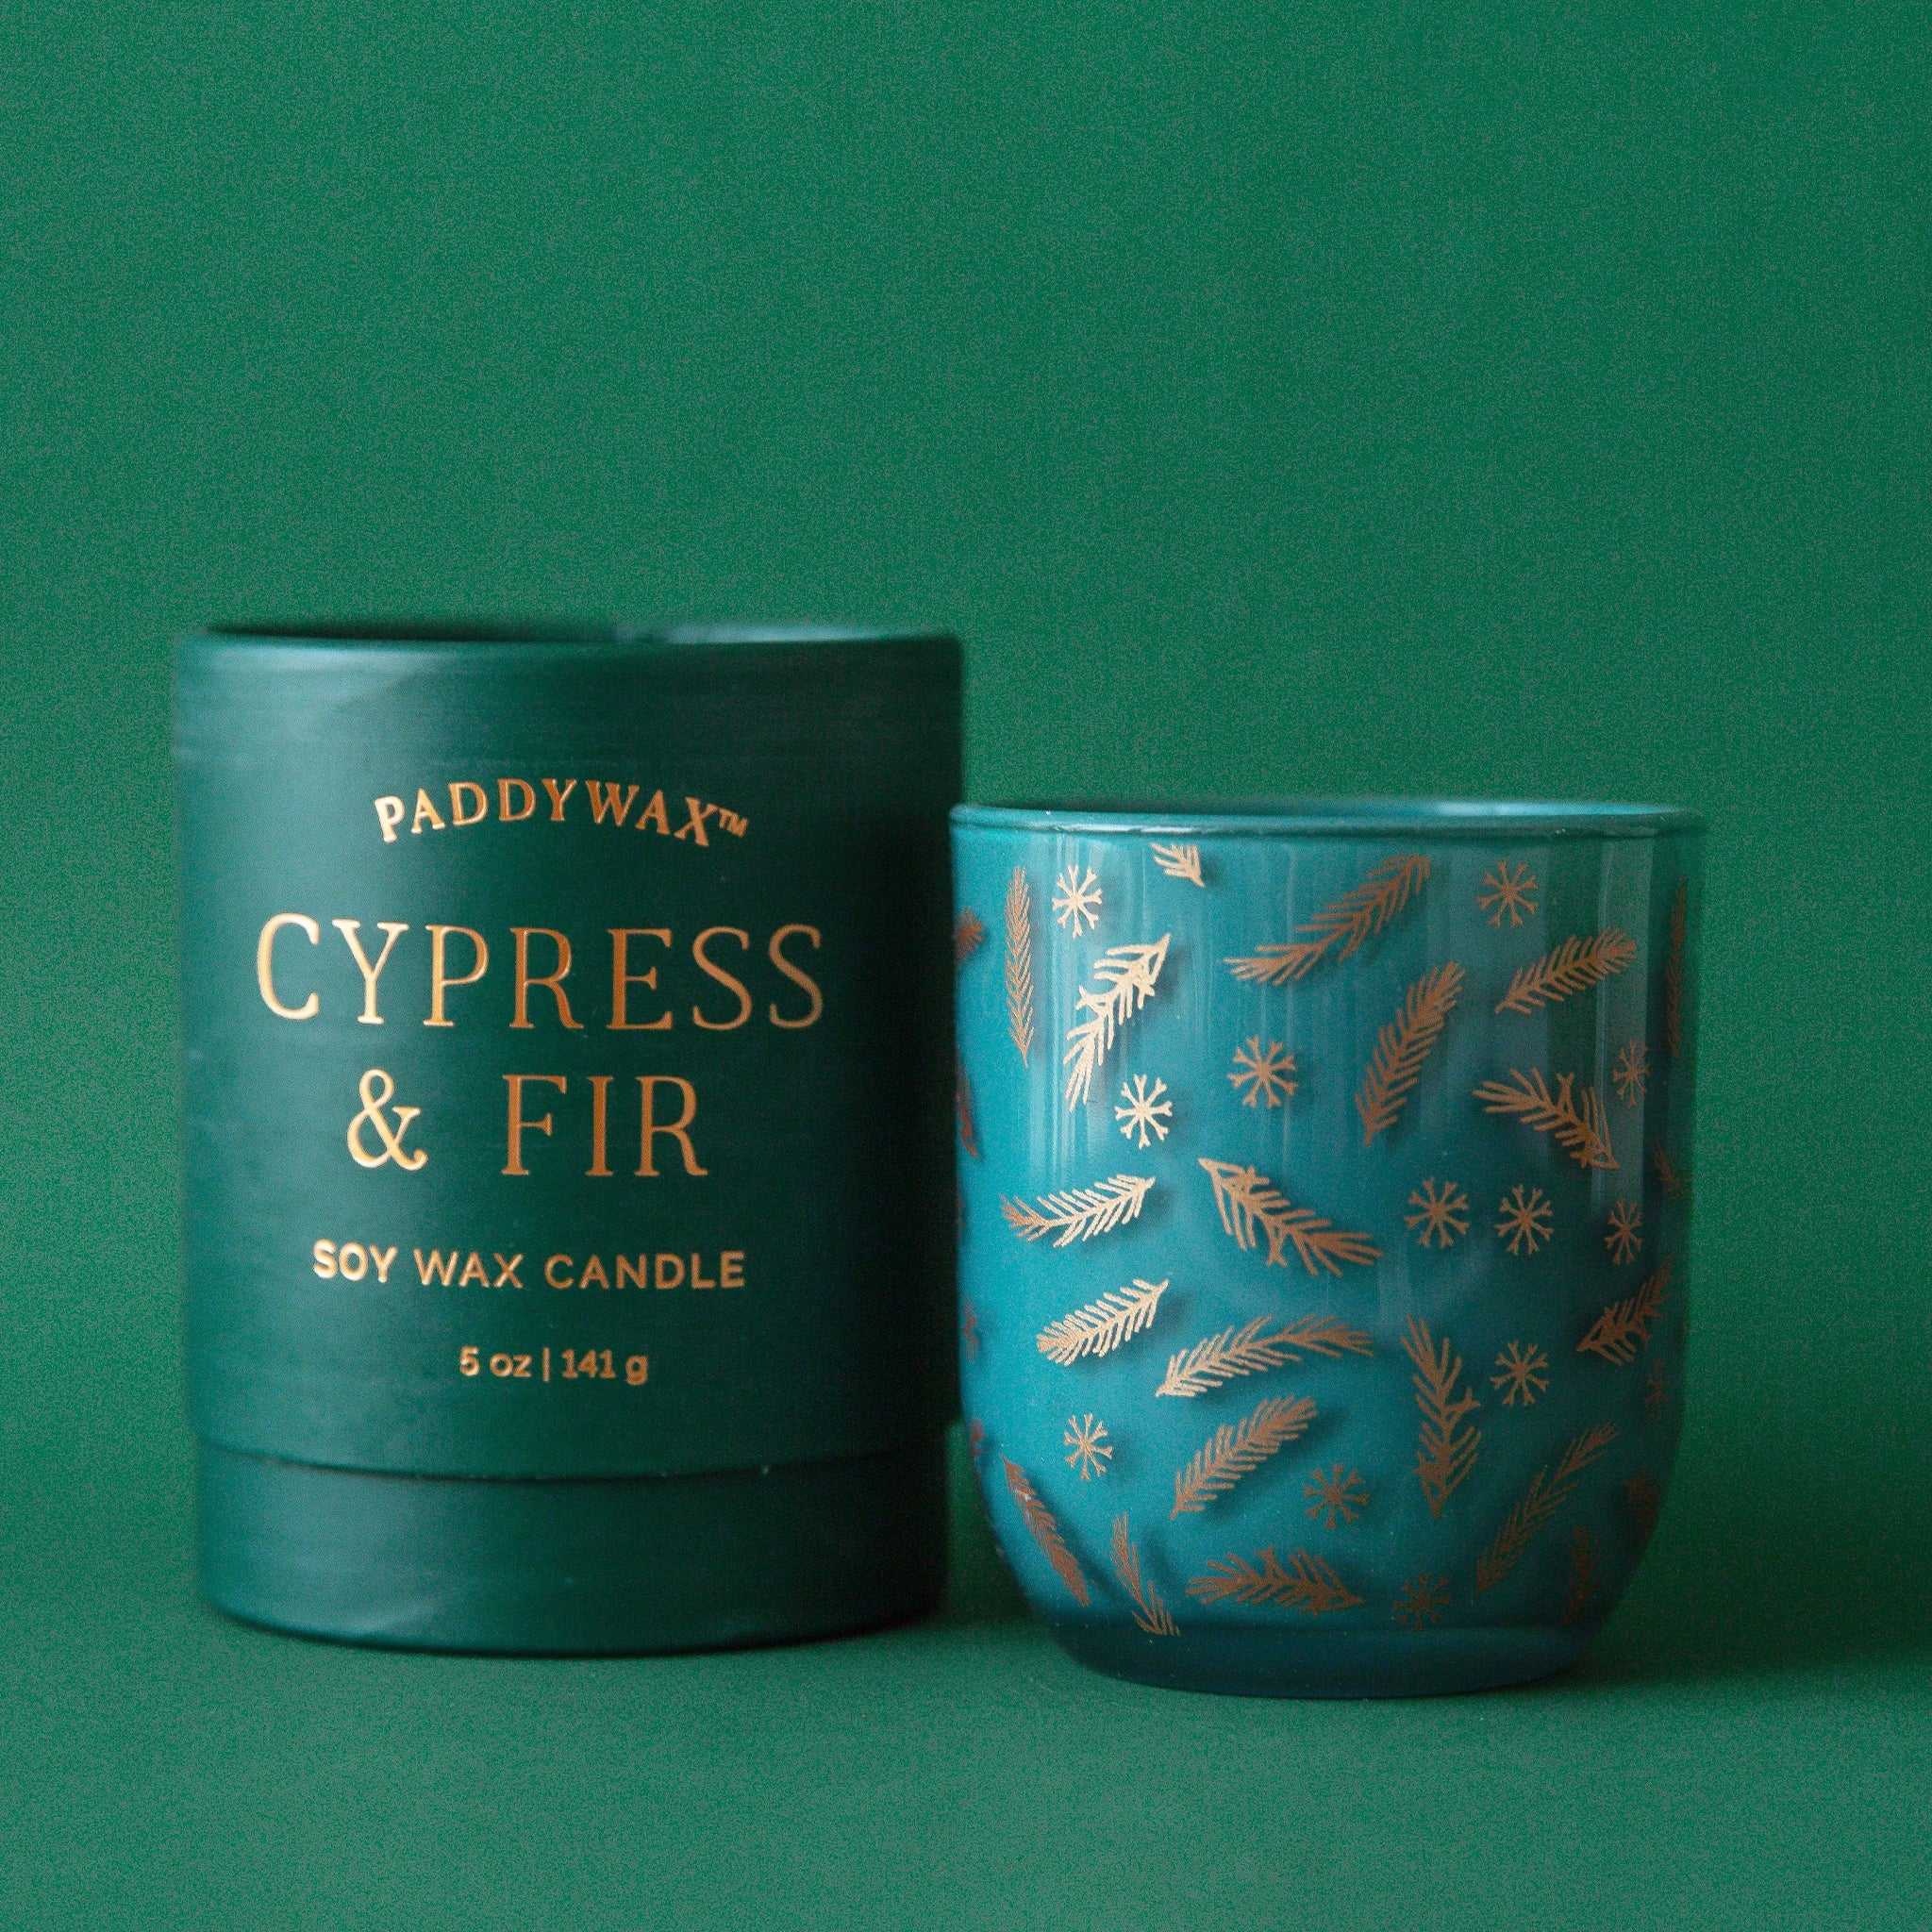 On a dark green background is a glass candle jar in a dark green shade with gold pine and snowflake designs alongside a cardboard tube container with gold foiled text that reads, "Paddywax Cypress & Fir Soy Wax Candle".